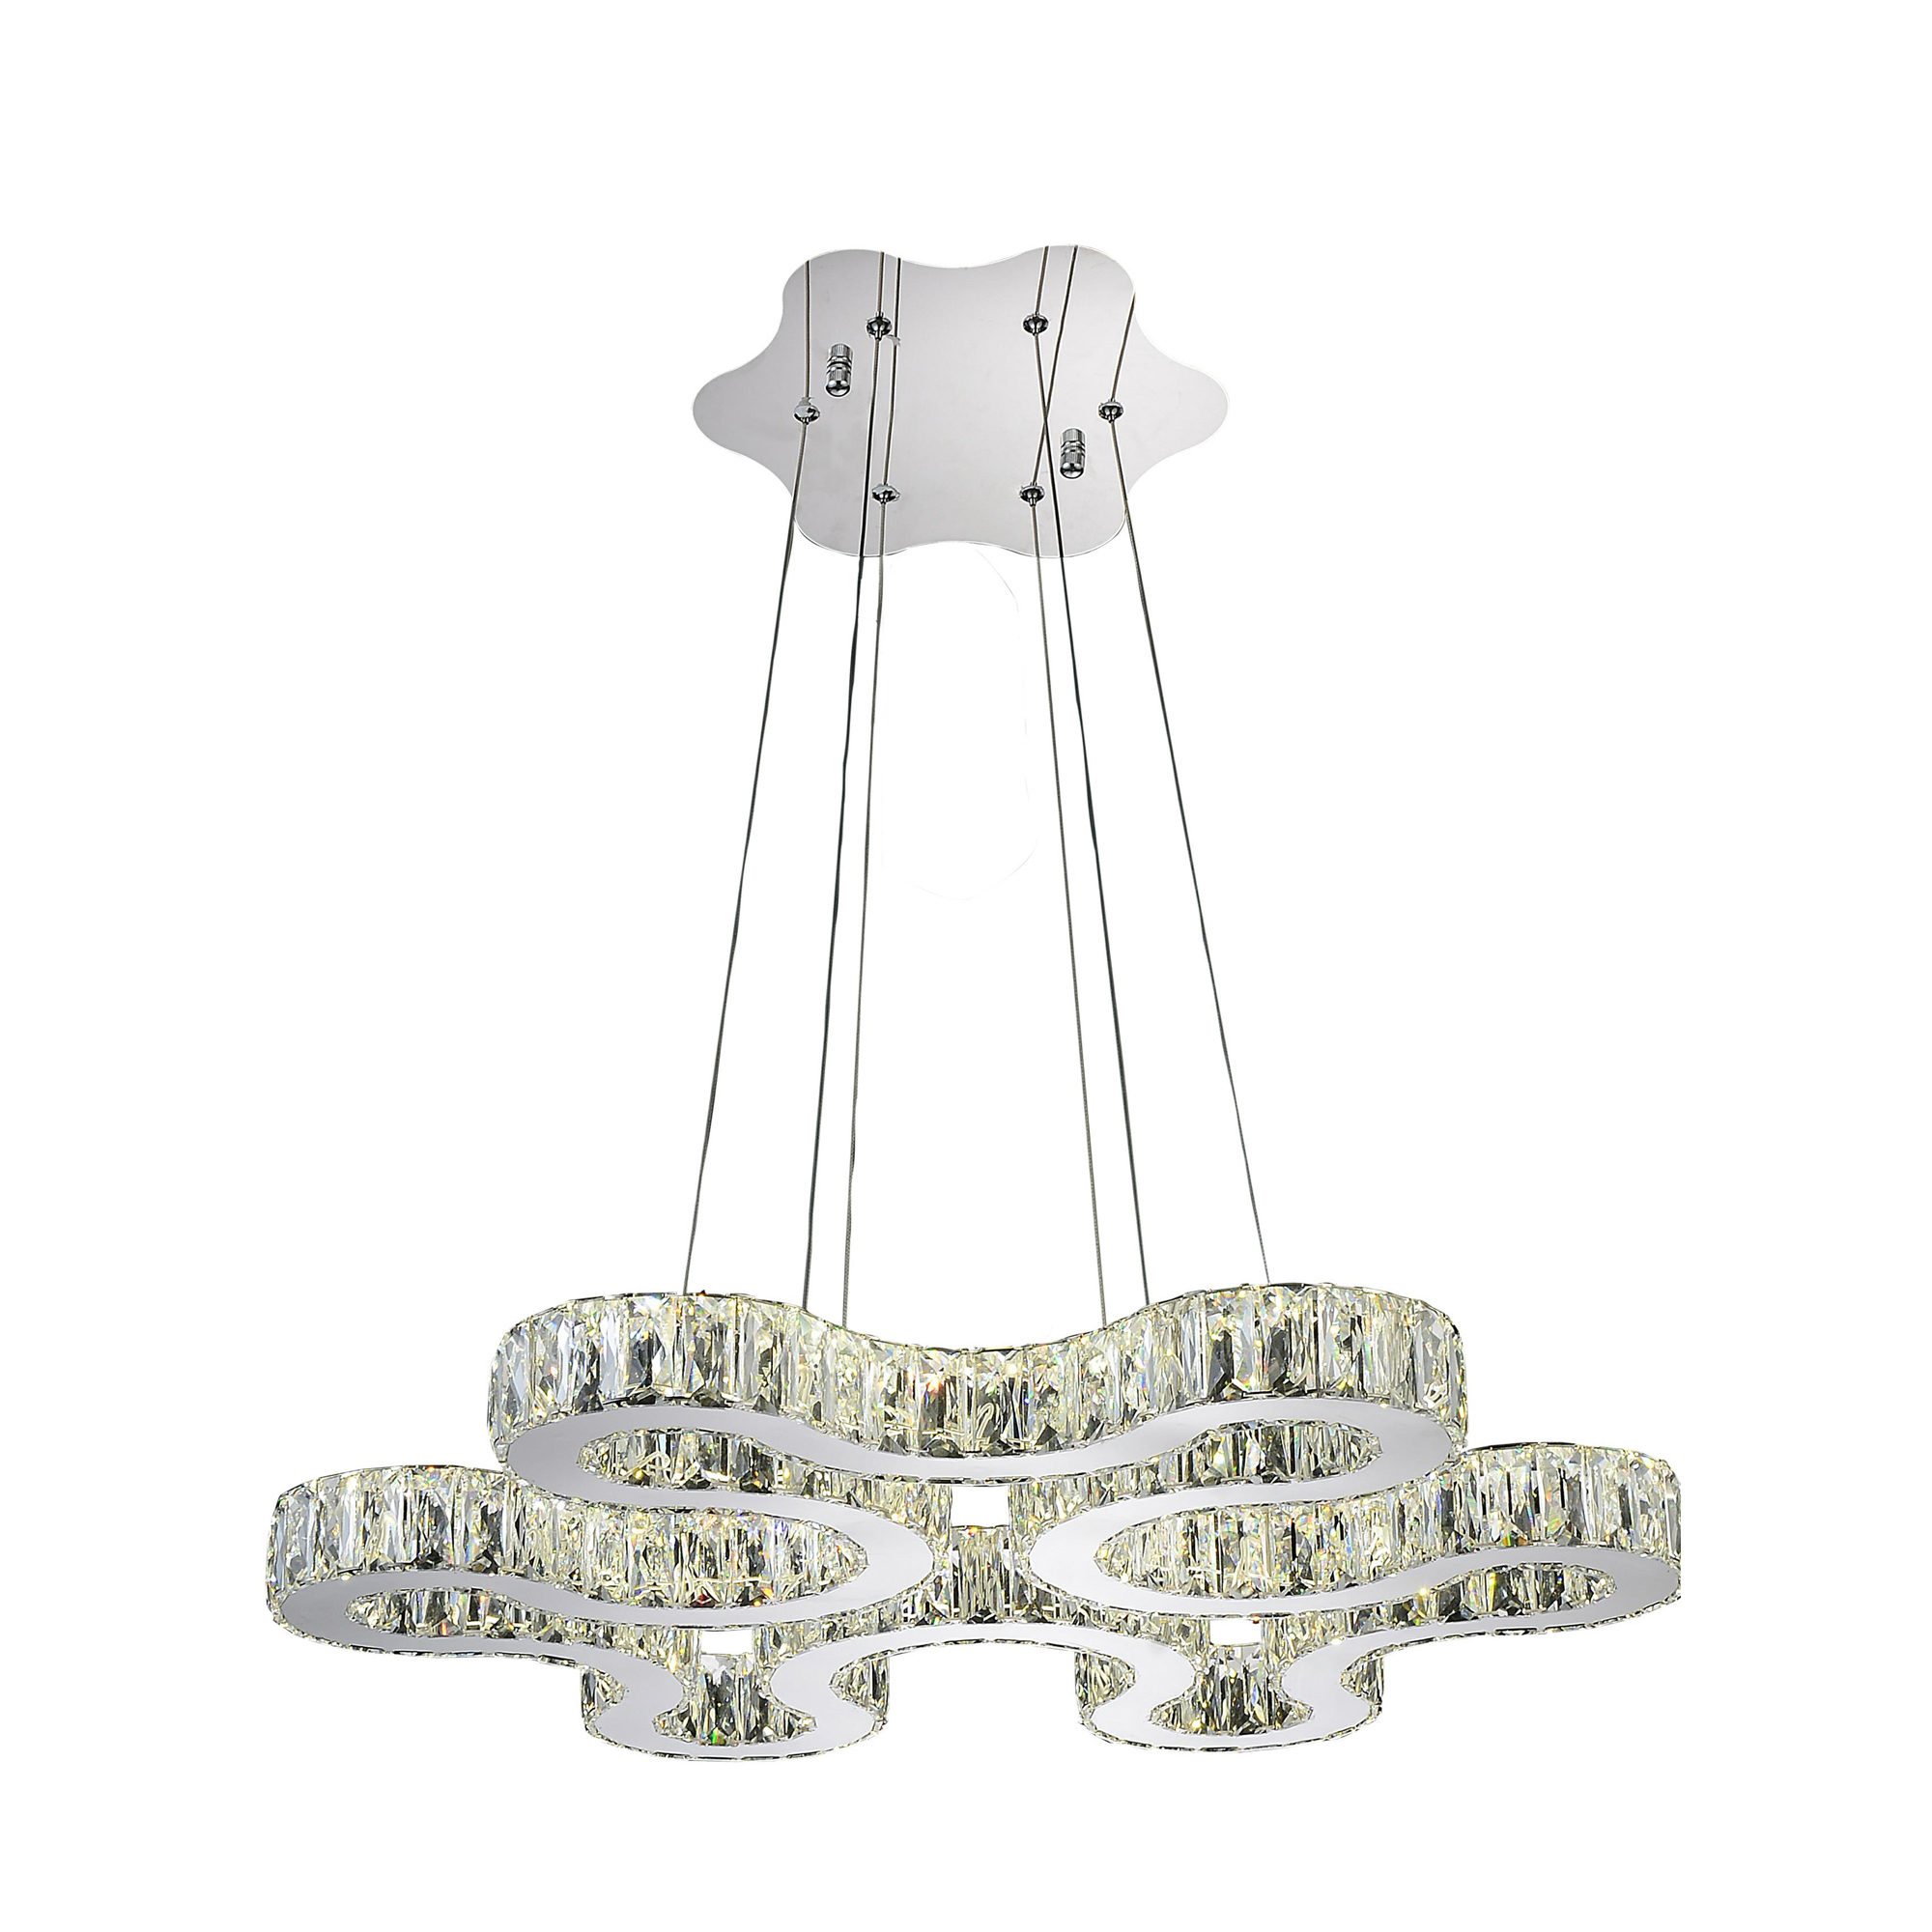 Odessa LED Chandelier With Chrome Finish